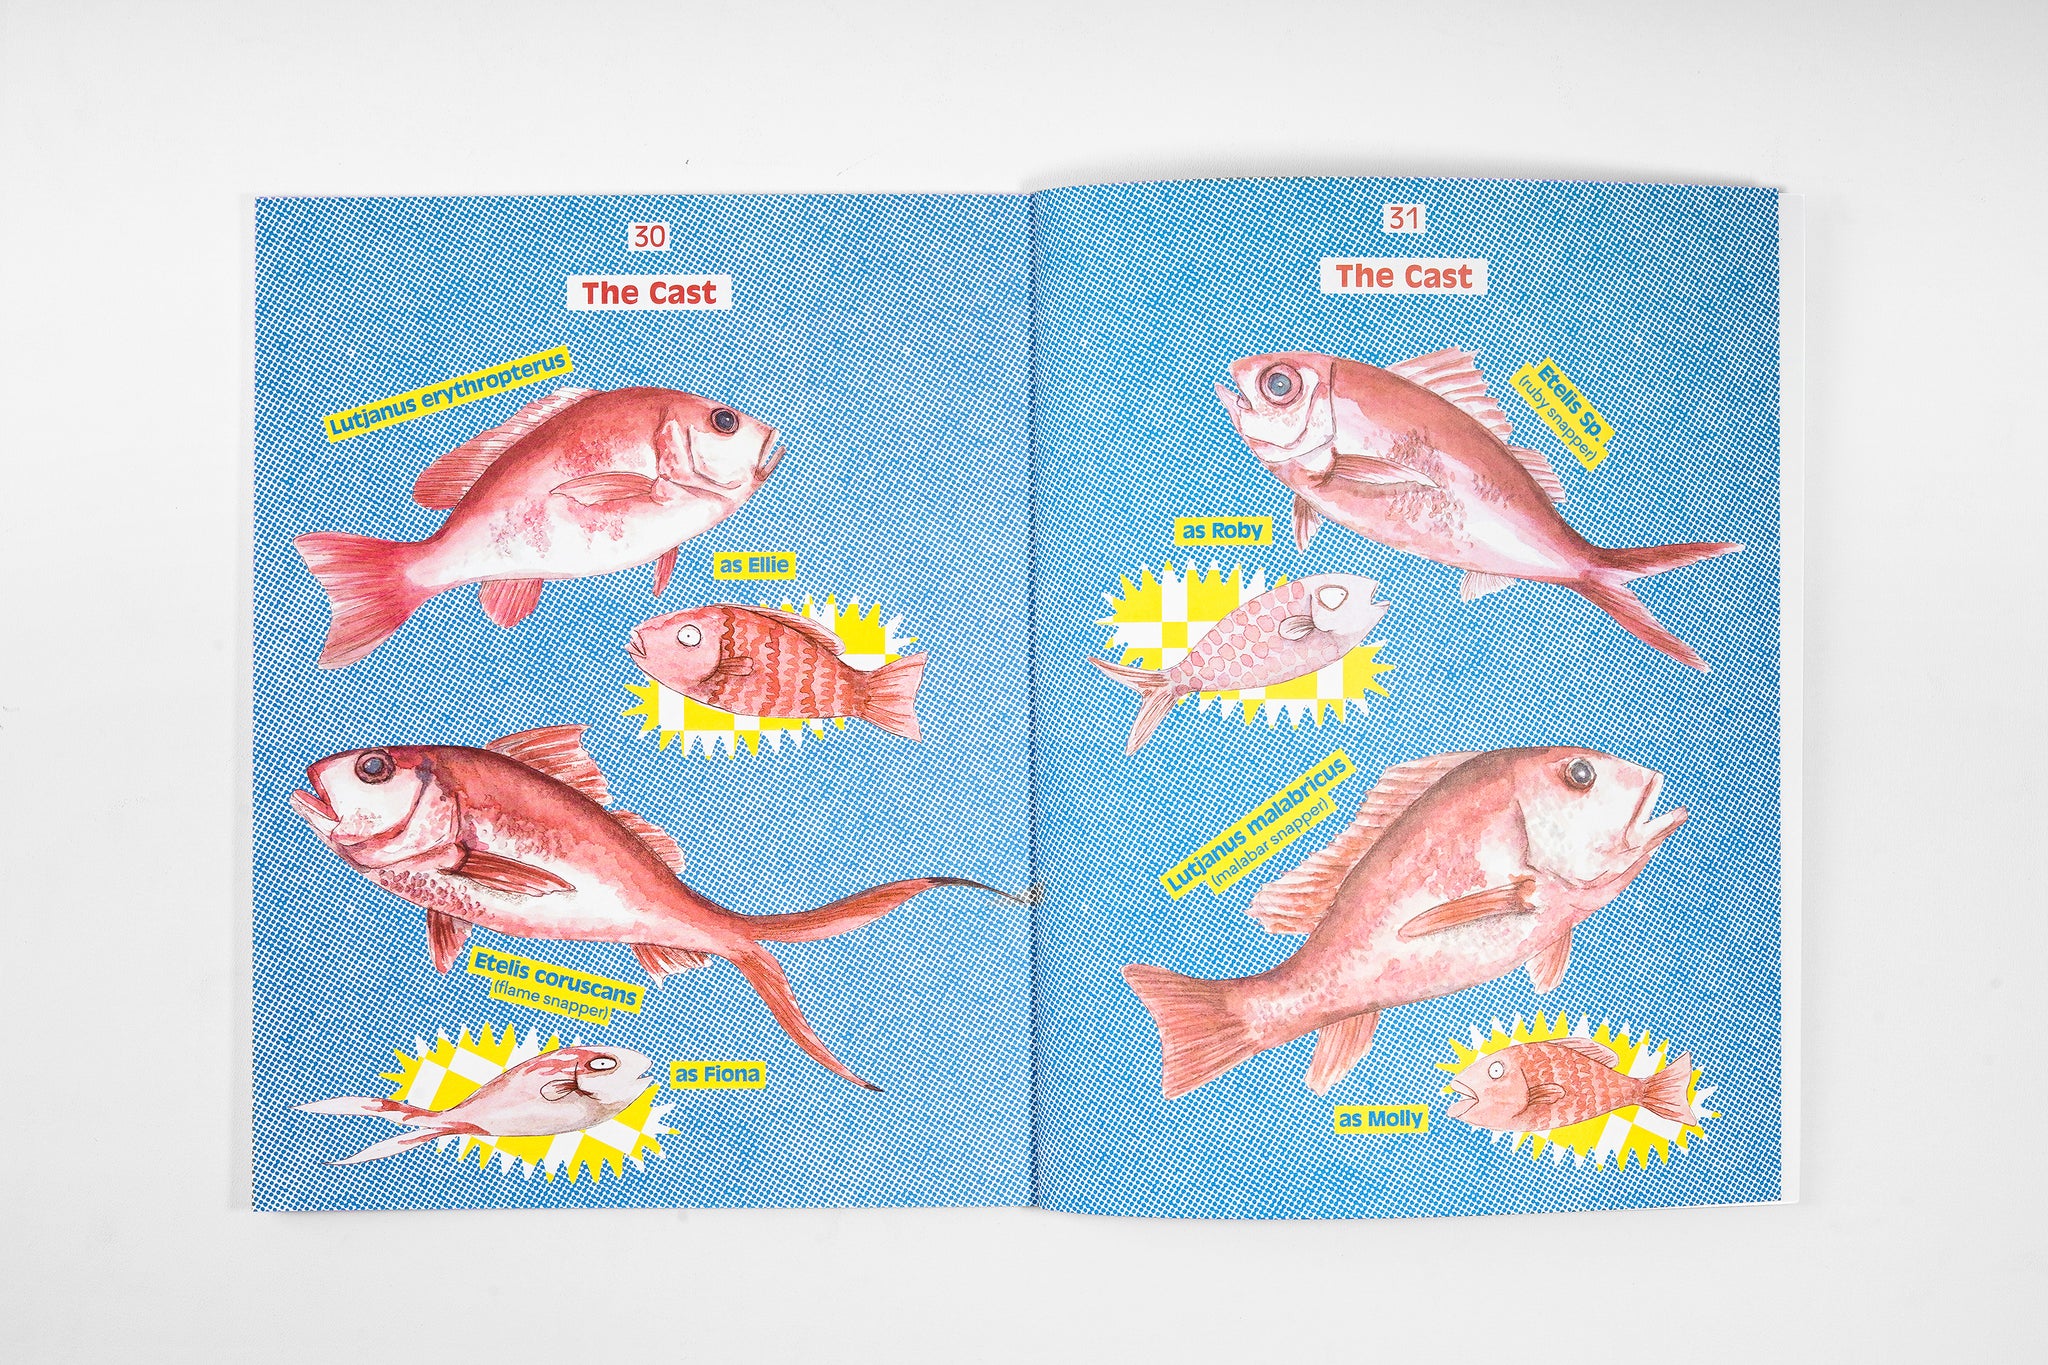 A Snapper Tale from Elle Wibisono published by Binatang Press